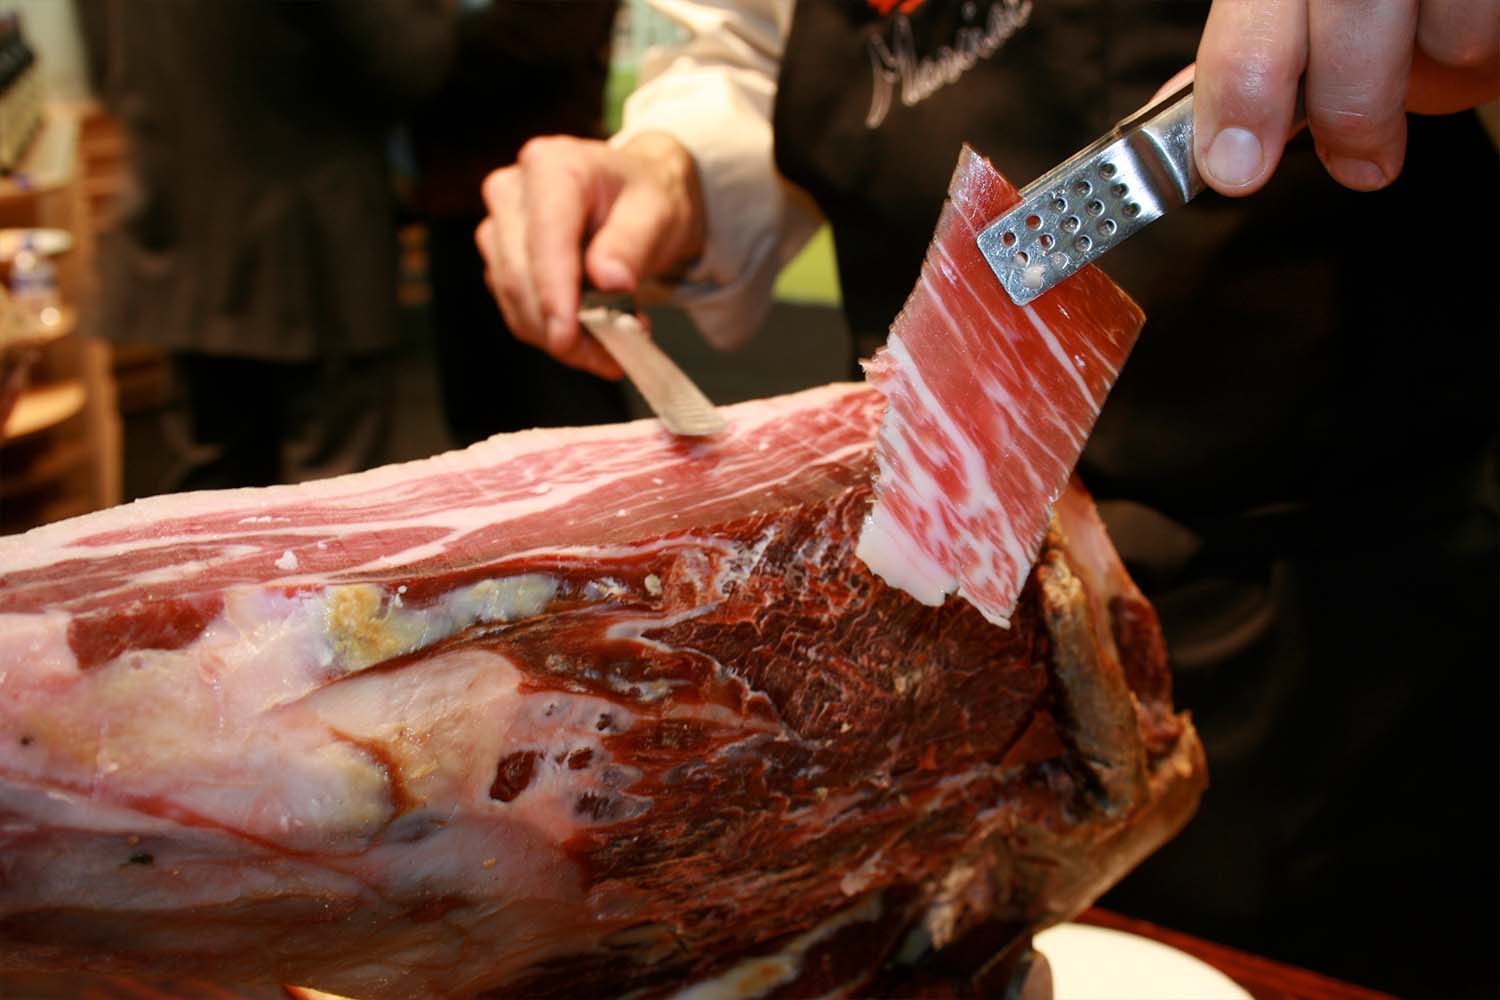 A leg of ham clamped in a jamonero holder